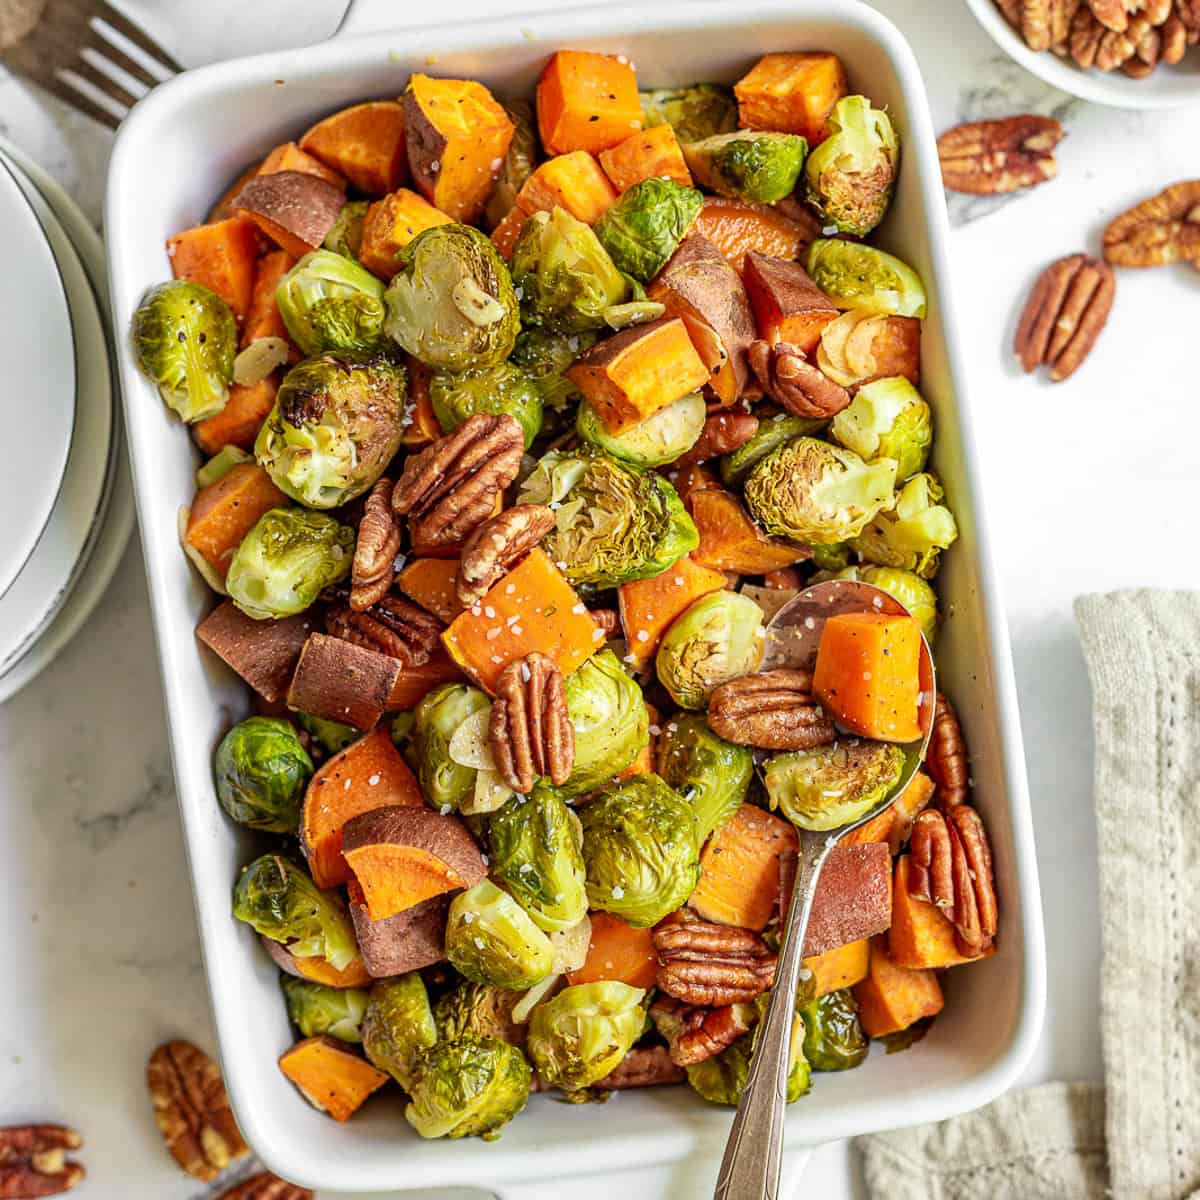 Roasted brussel sprouts and sweet potatoes